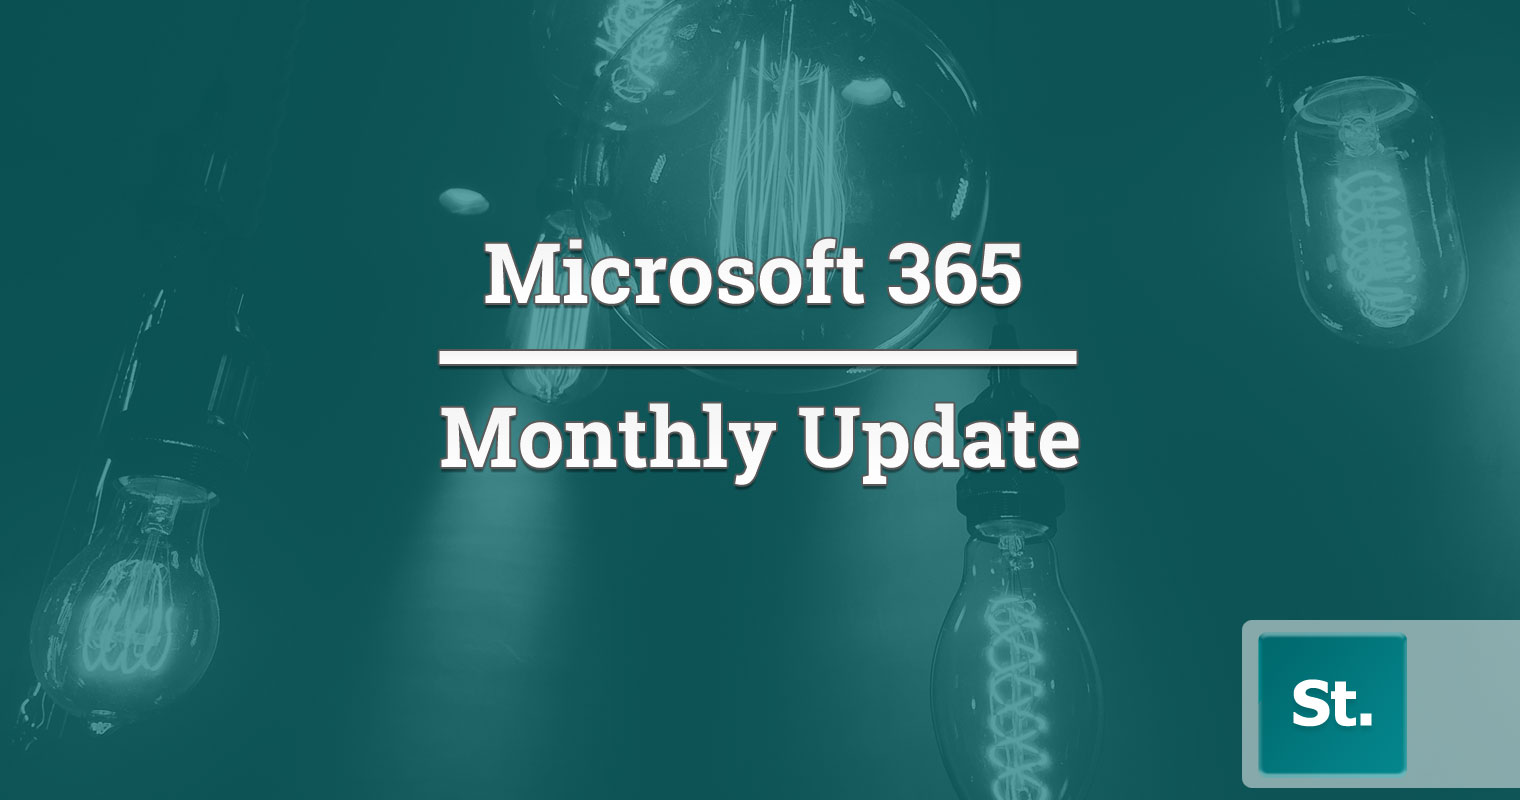 Microsoft 365 monthly update – July 2020